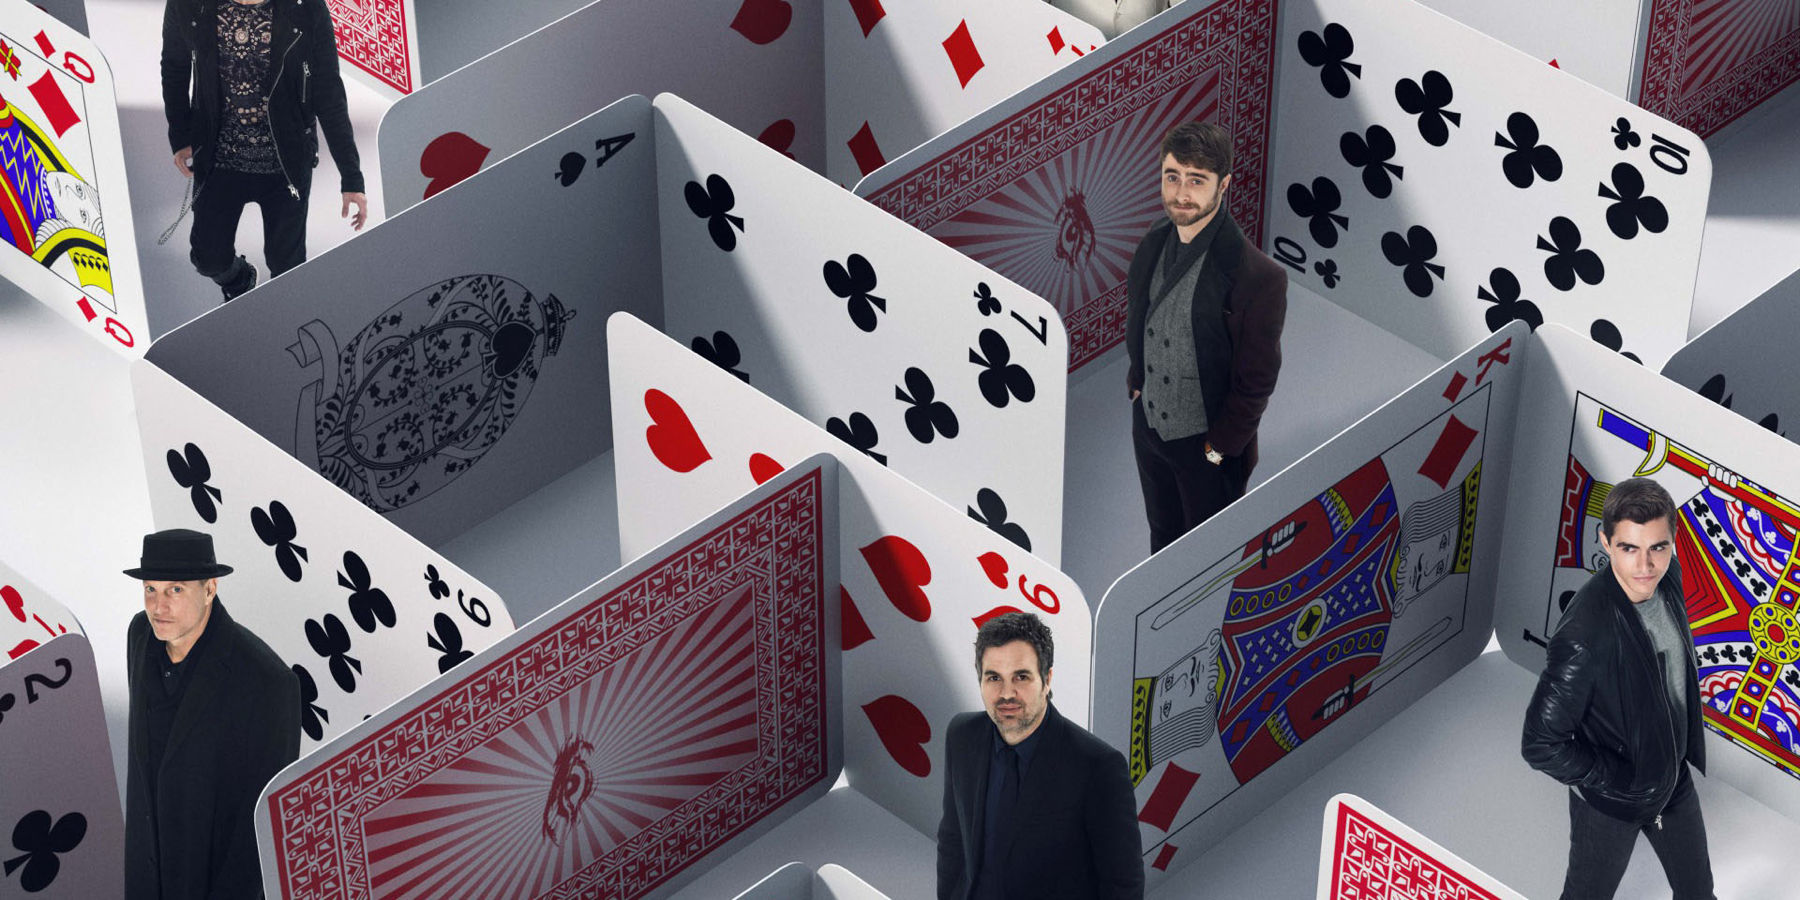 Now You See Me #6